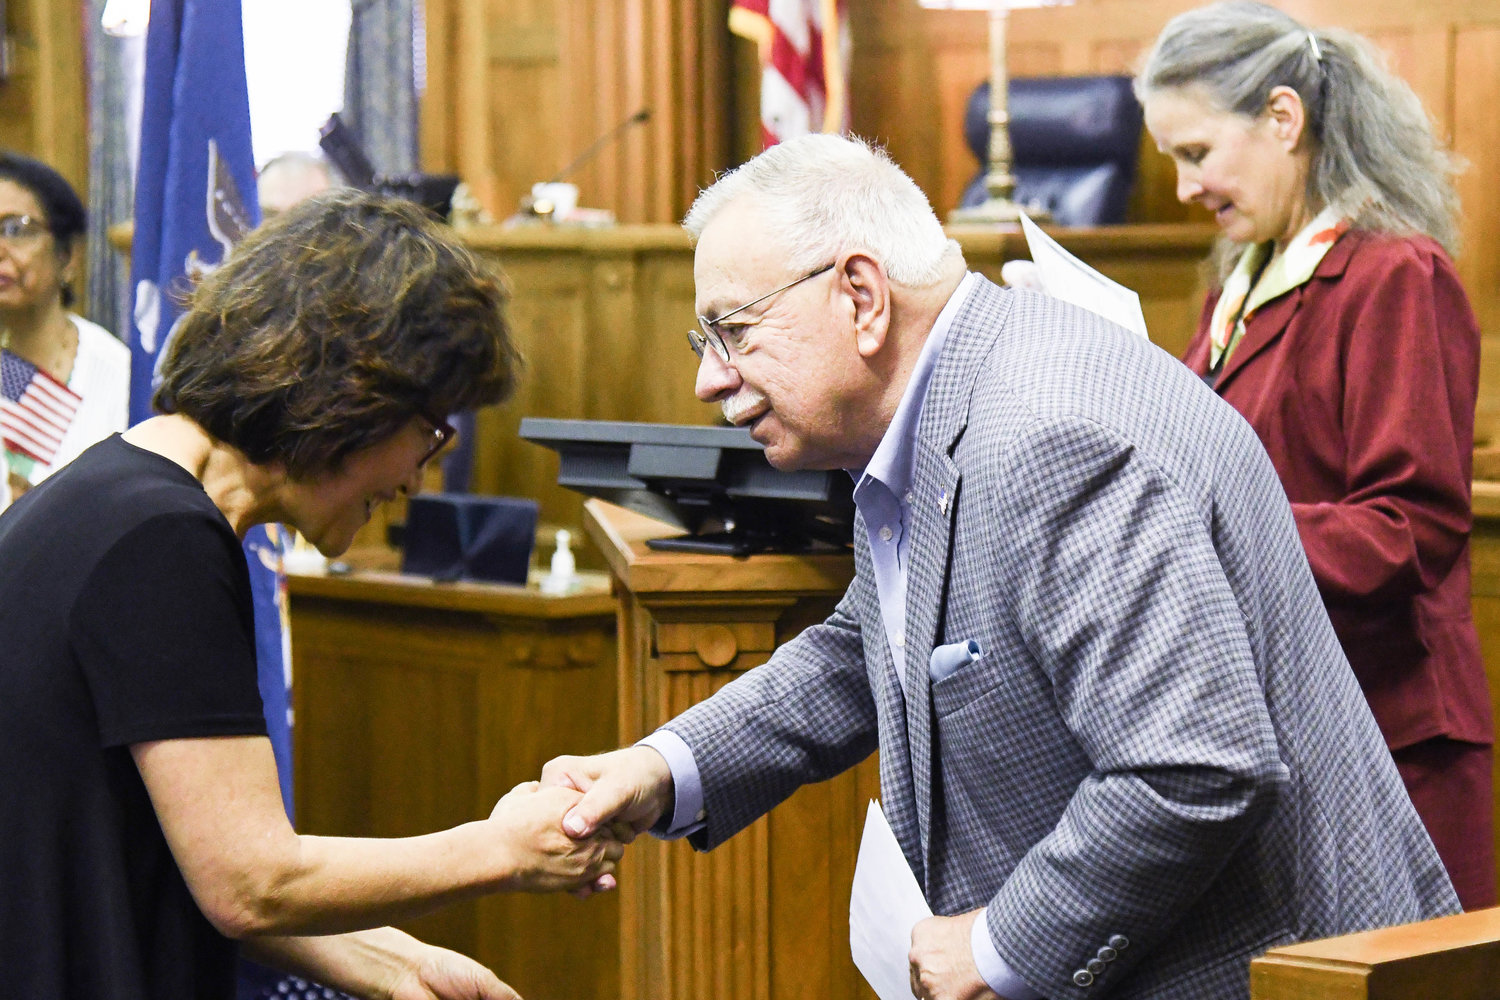 Guest speaker Joe Kelly shakes hands with newly recognized citizens during a naturalization ceremony on Thursday at the federal courthouse in Utica.